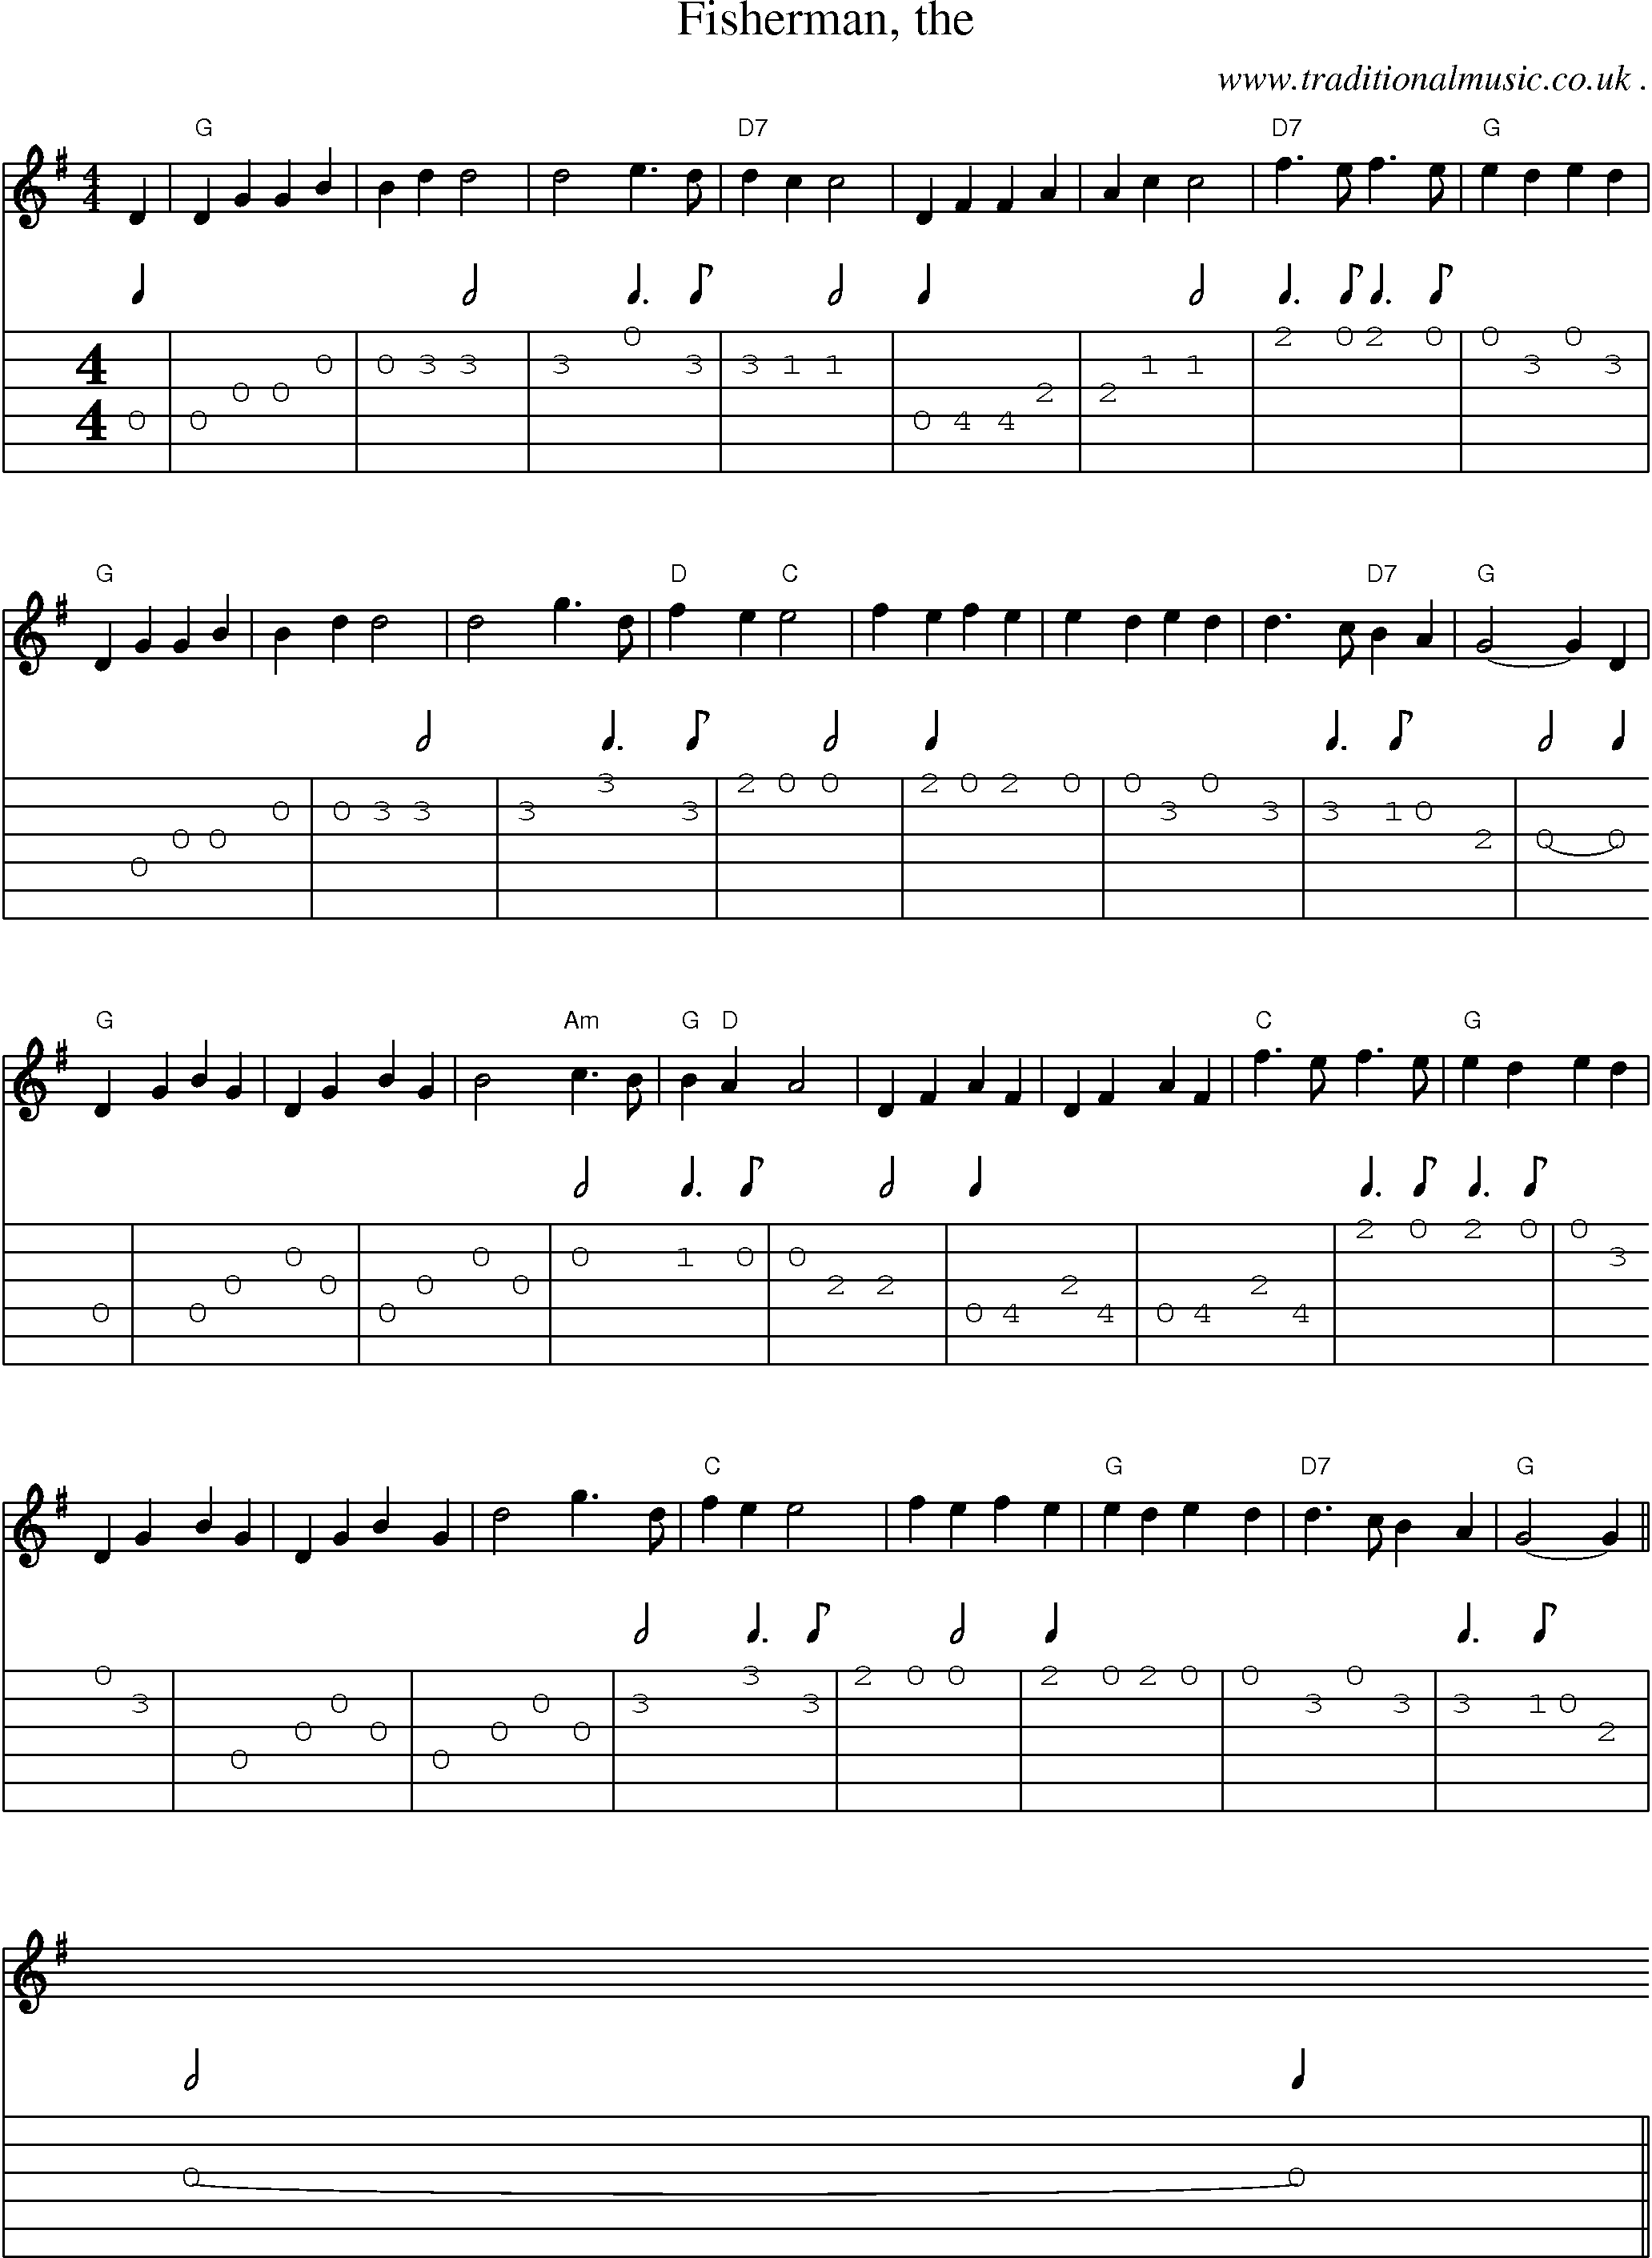 Sheet-music  score, Chords and Guitar Tabs for Fisherman The